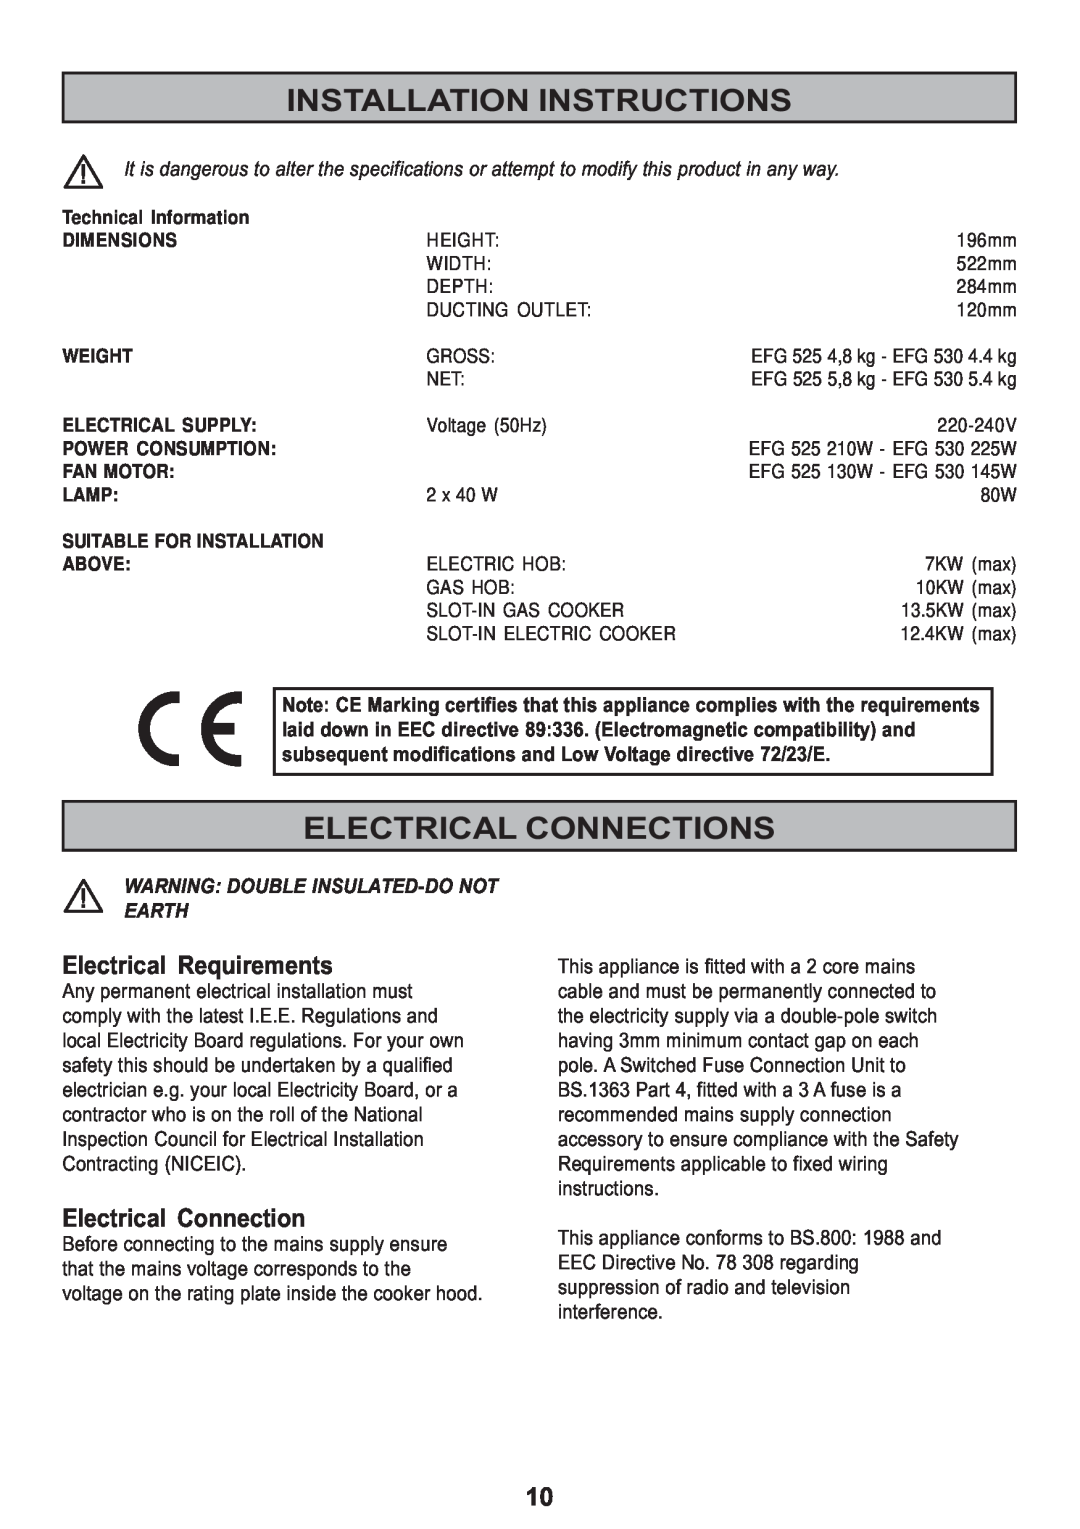 Electrolux EFG 530, EFG 525 manual Installation Instructions, Electrical Connections, Electrical Requirements 